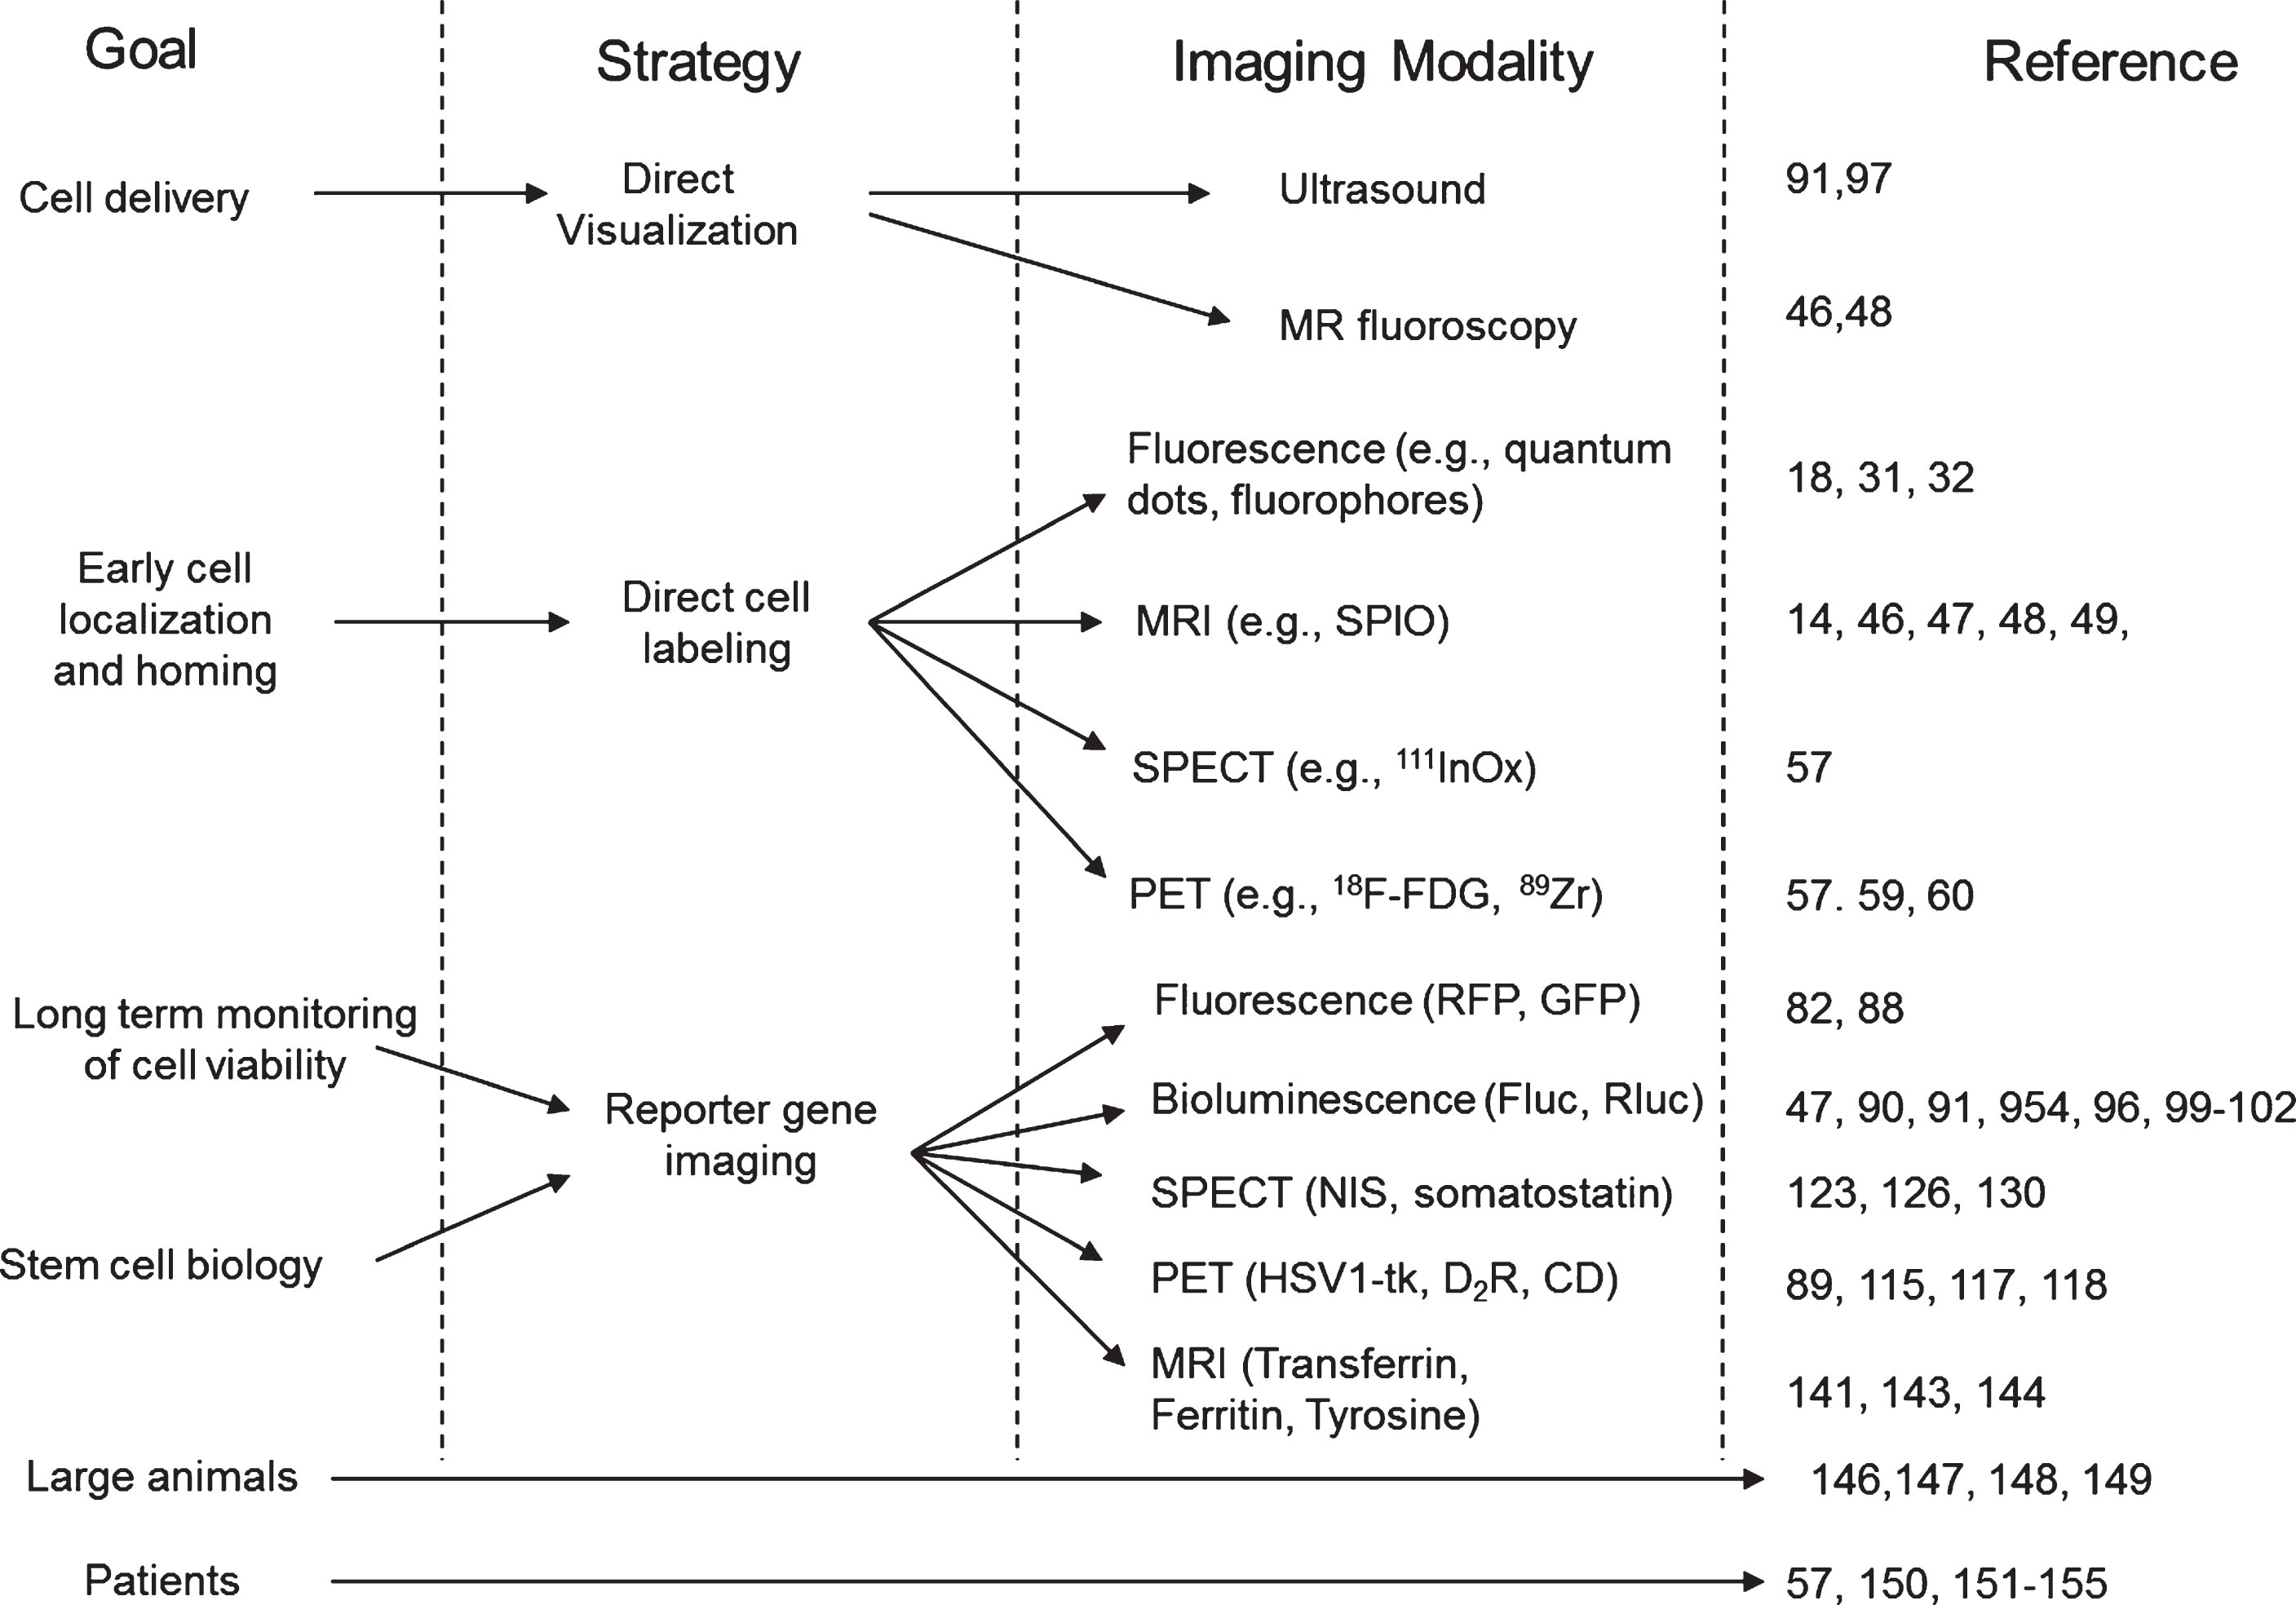 Summary of the different imaging strategies that can be used to assess the delivery, short- and long-term monitoring of stem cell viability and biology. MRI: magnetic resonance imaging, SPECT: single photon emission computed tomography, PET: positron emission tomography, RFP: red fluorescent protein, GFP: green fluorescence protein, Fluc: firefly luciferase, Rluc: renilla luciferase, NIS: sodium iodine symporter, HSV1-tk: herpes simplex virus type 1 thymidine kinase, D2R: dopamine receptor type 2, CD: cytosine deaminase.